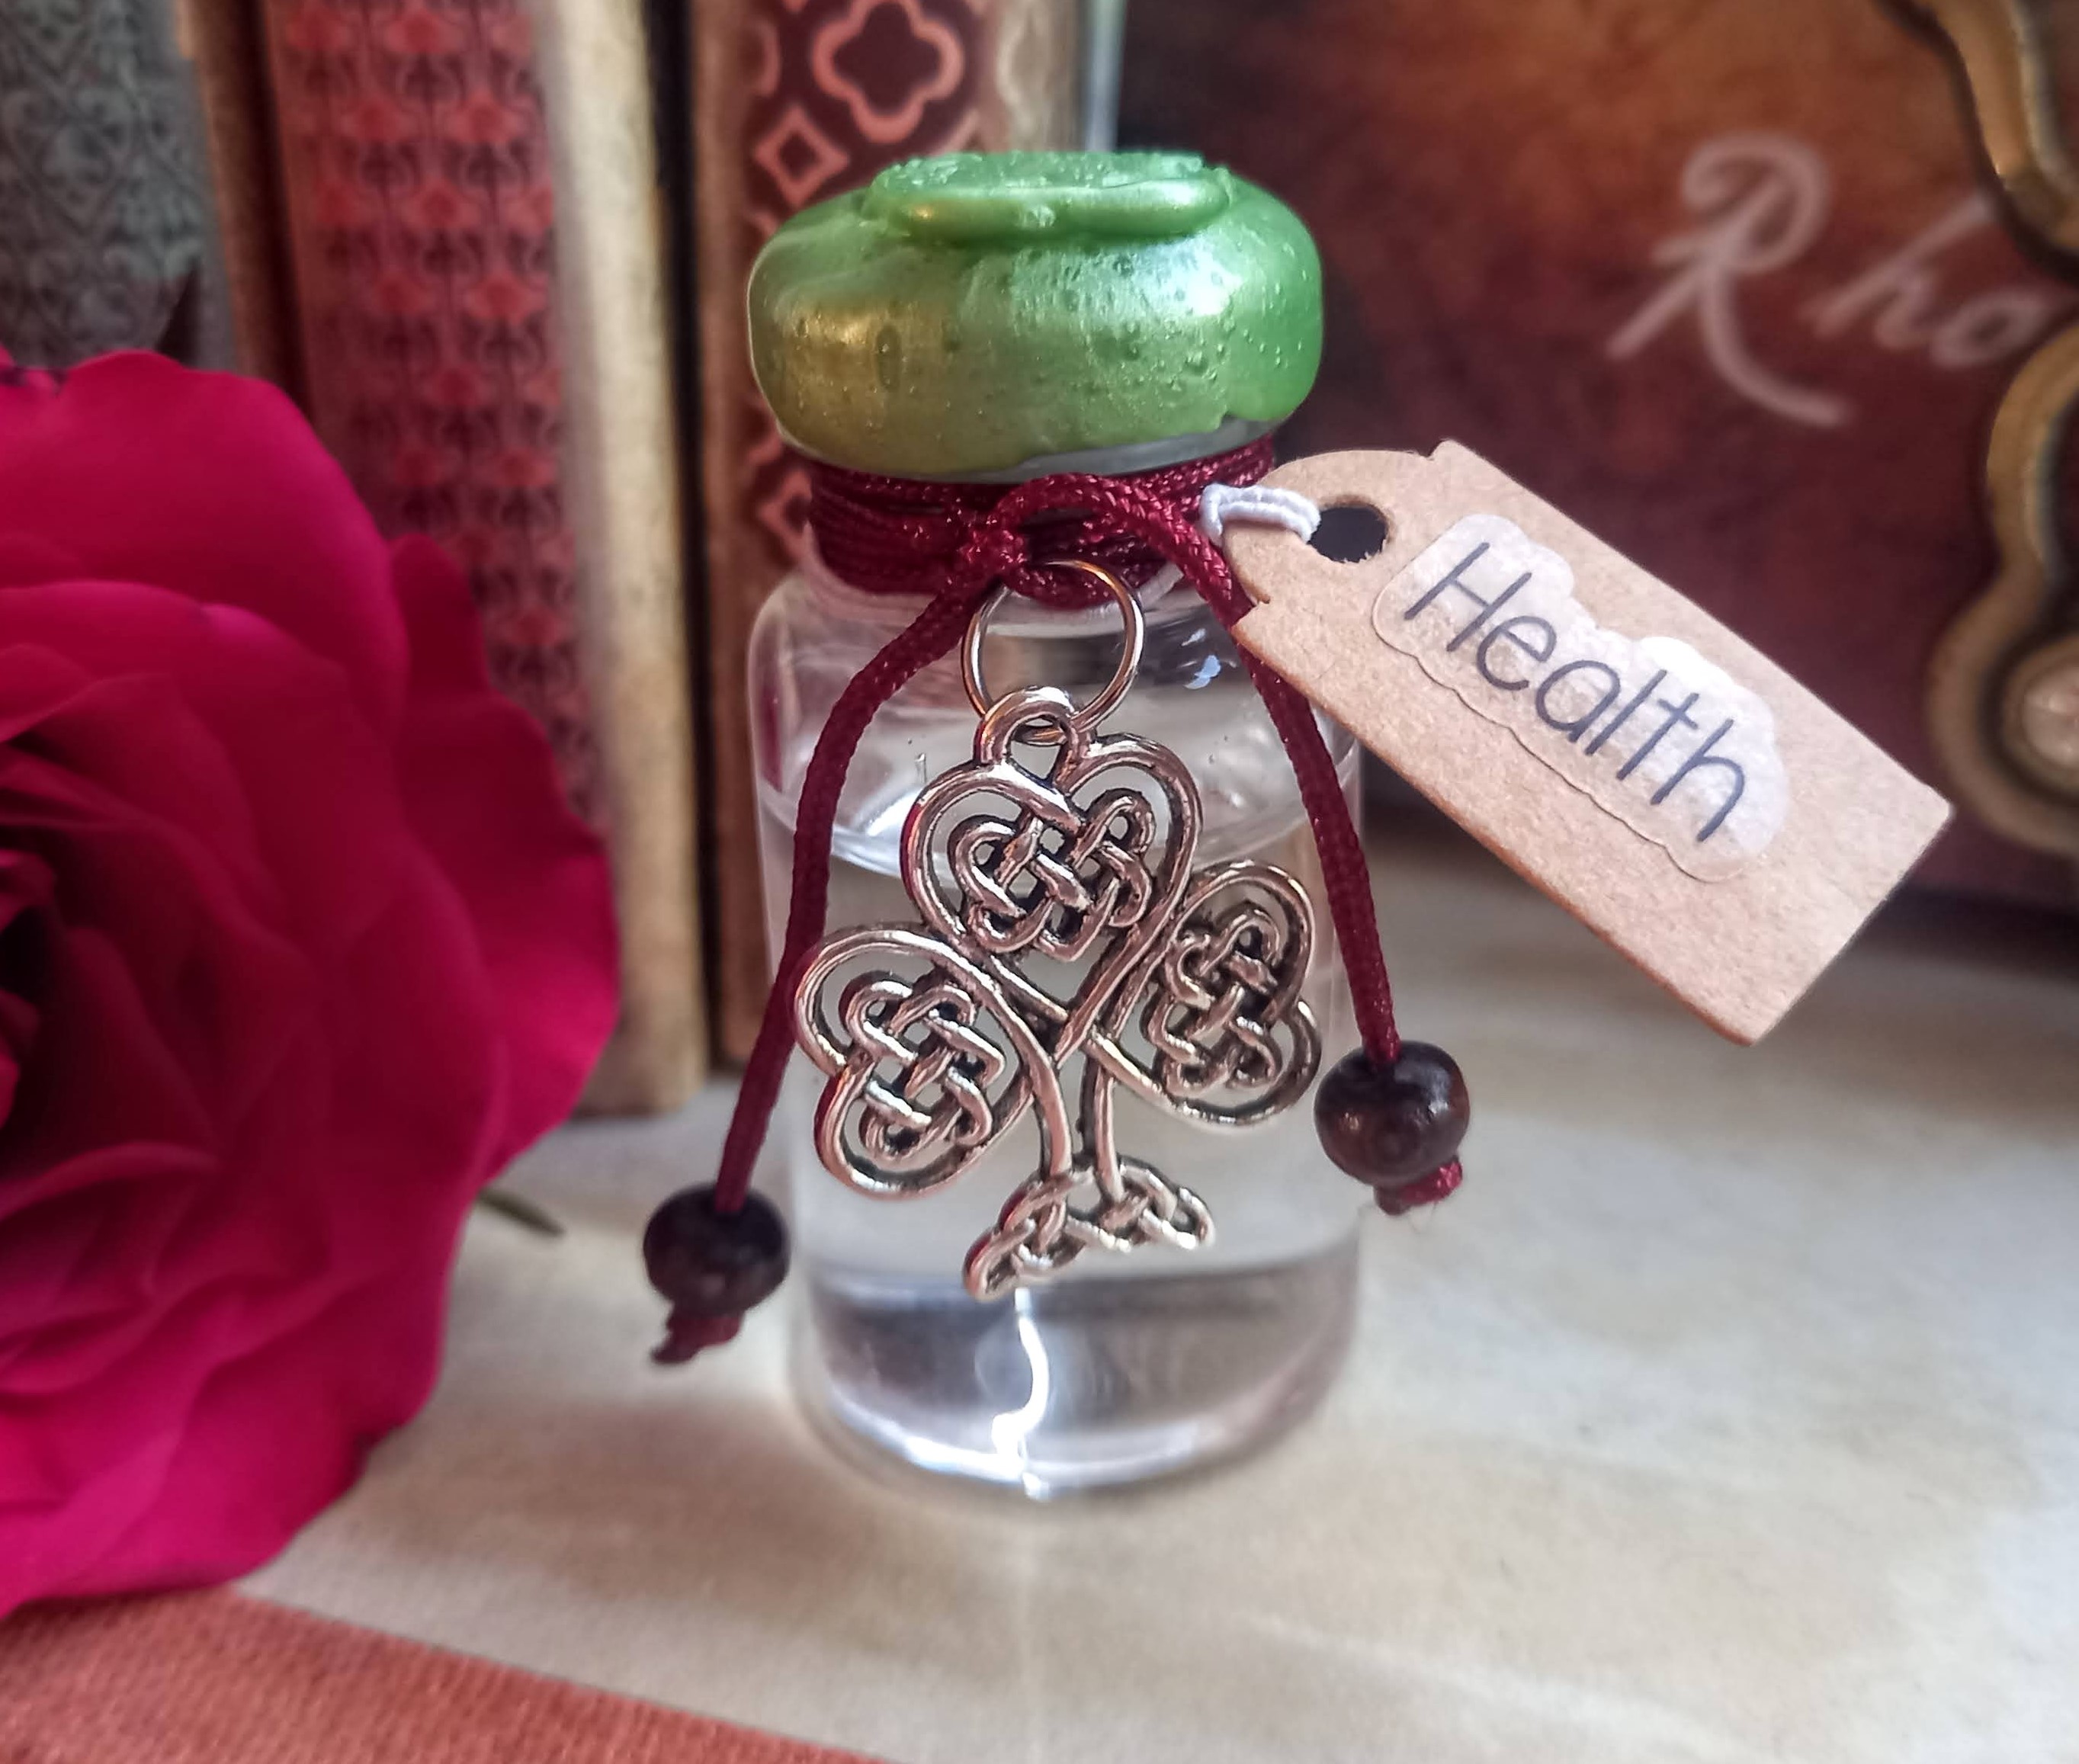 VIAL* Luck and Guidance - Charmed Vial filled with St.Brigid Well Water from an Irish Holy Well.